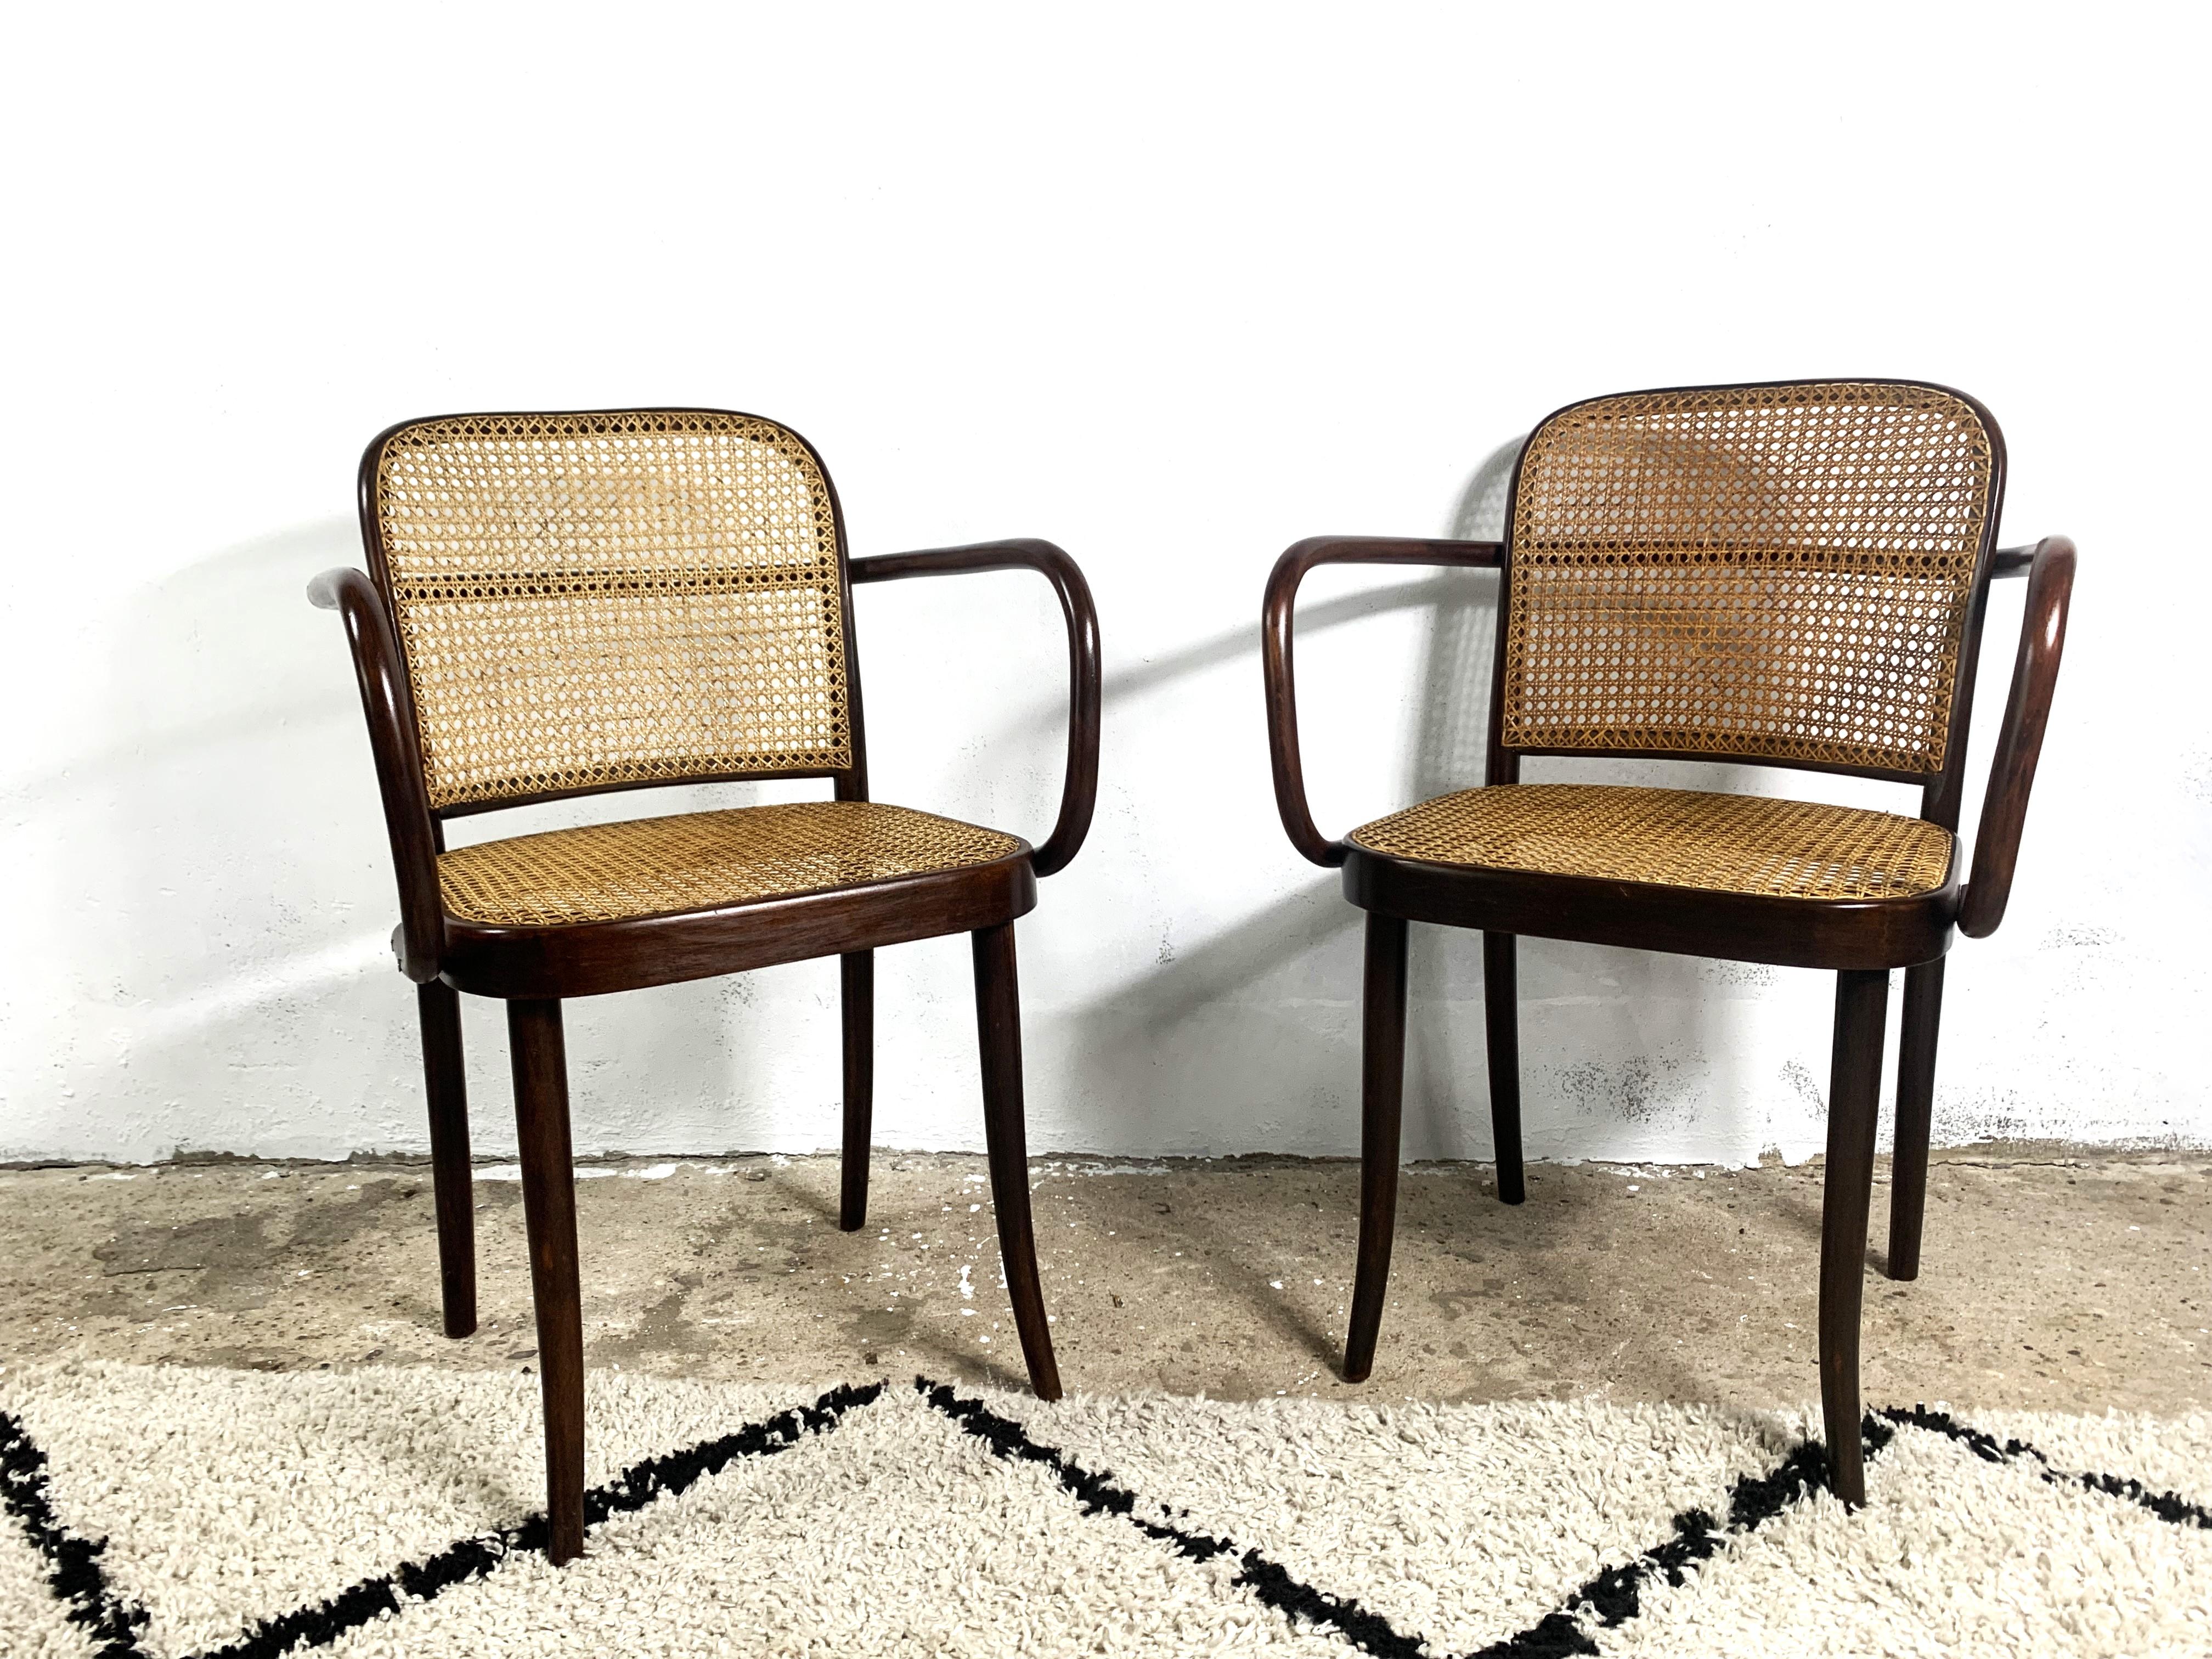 Thonet A811, 1930s, Rattan, Vintage - set of 2 For Sale 12